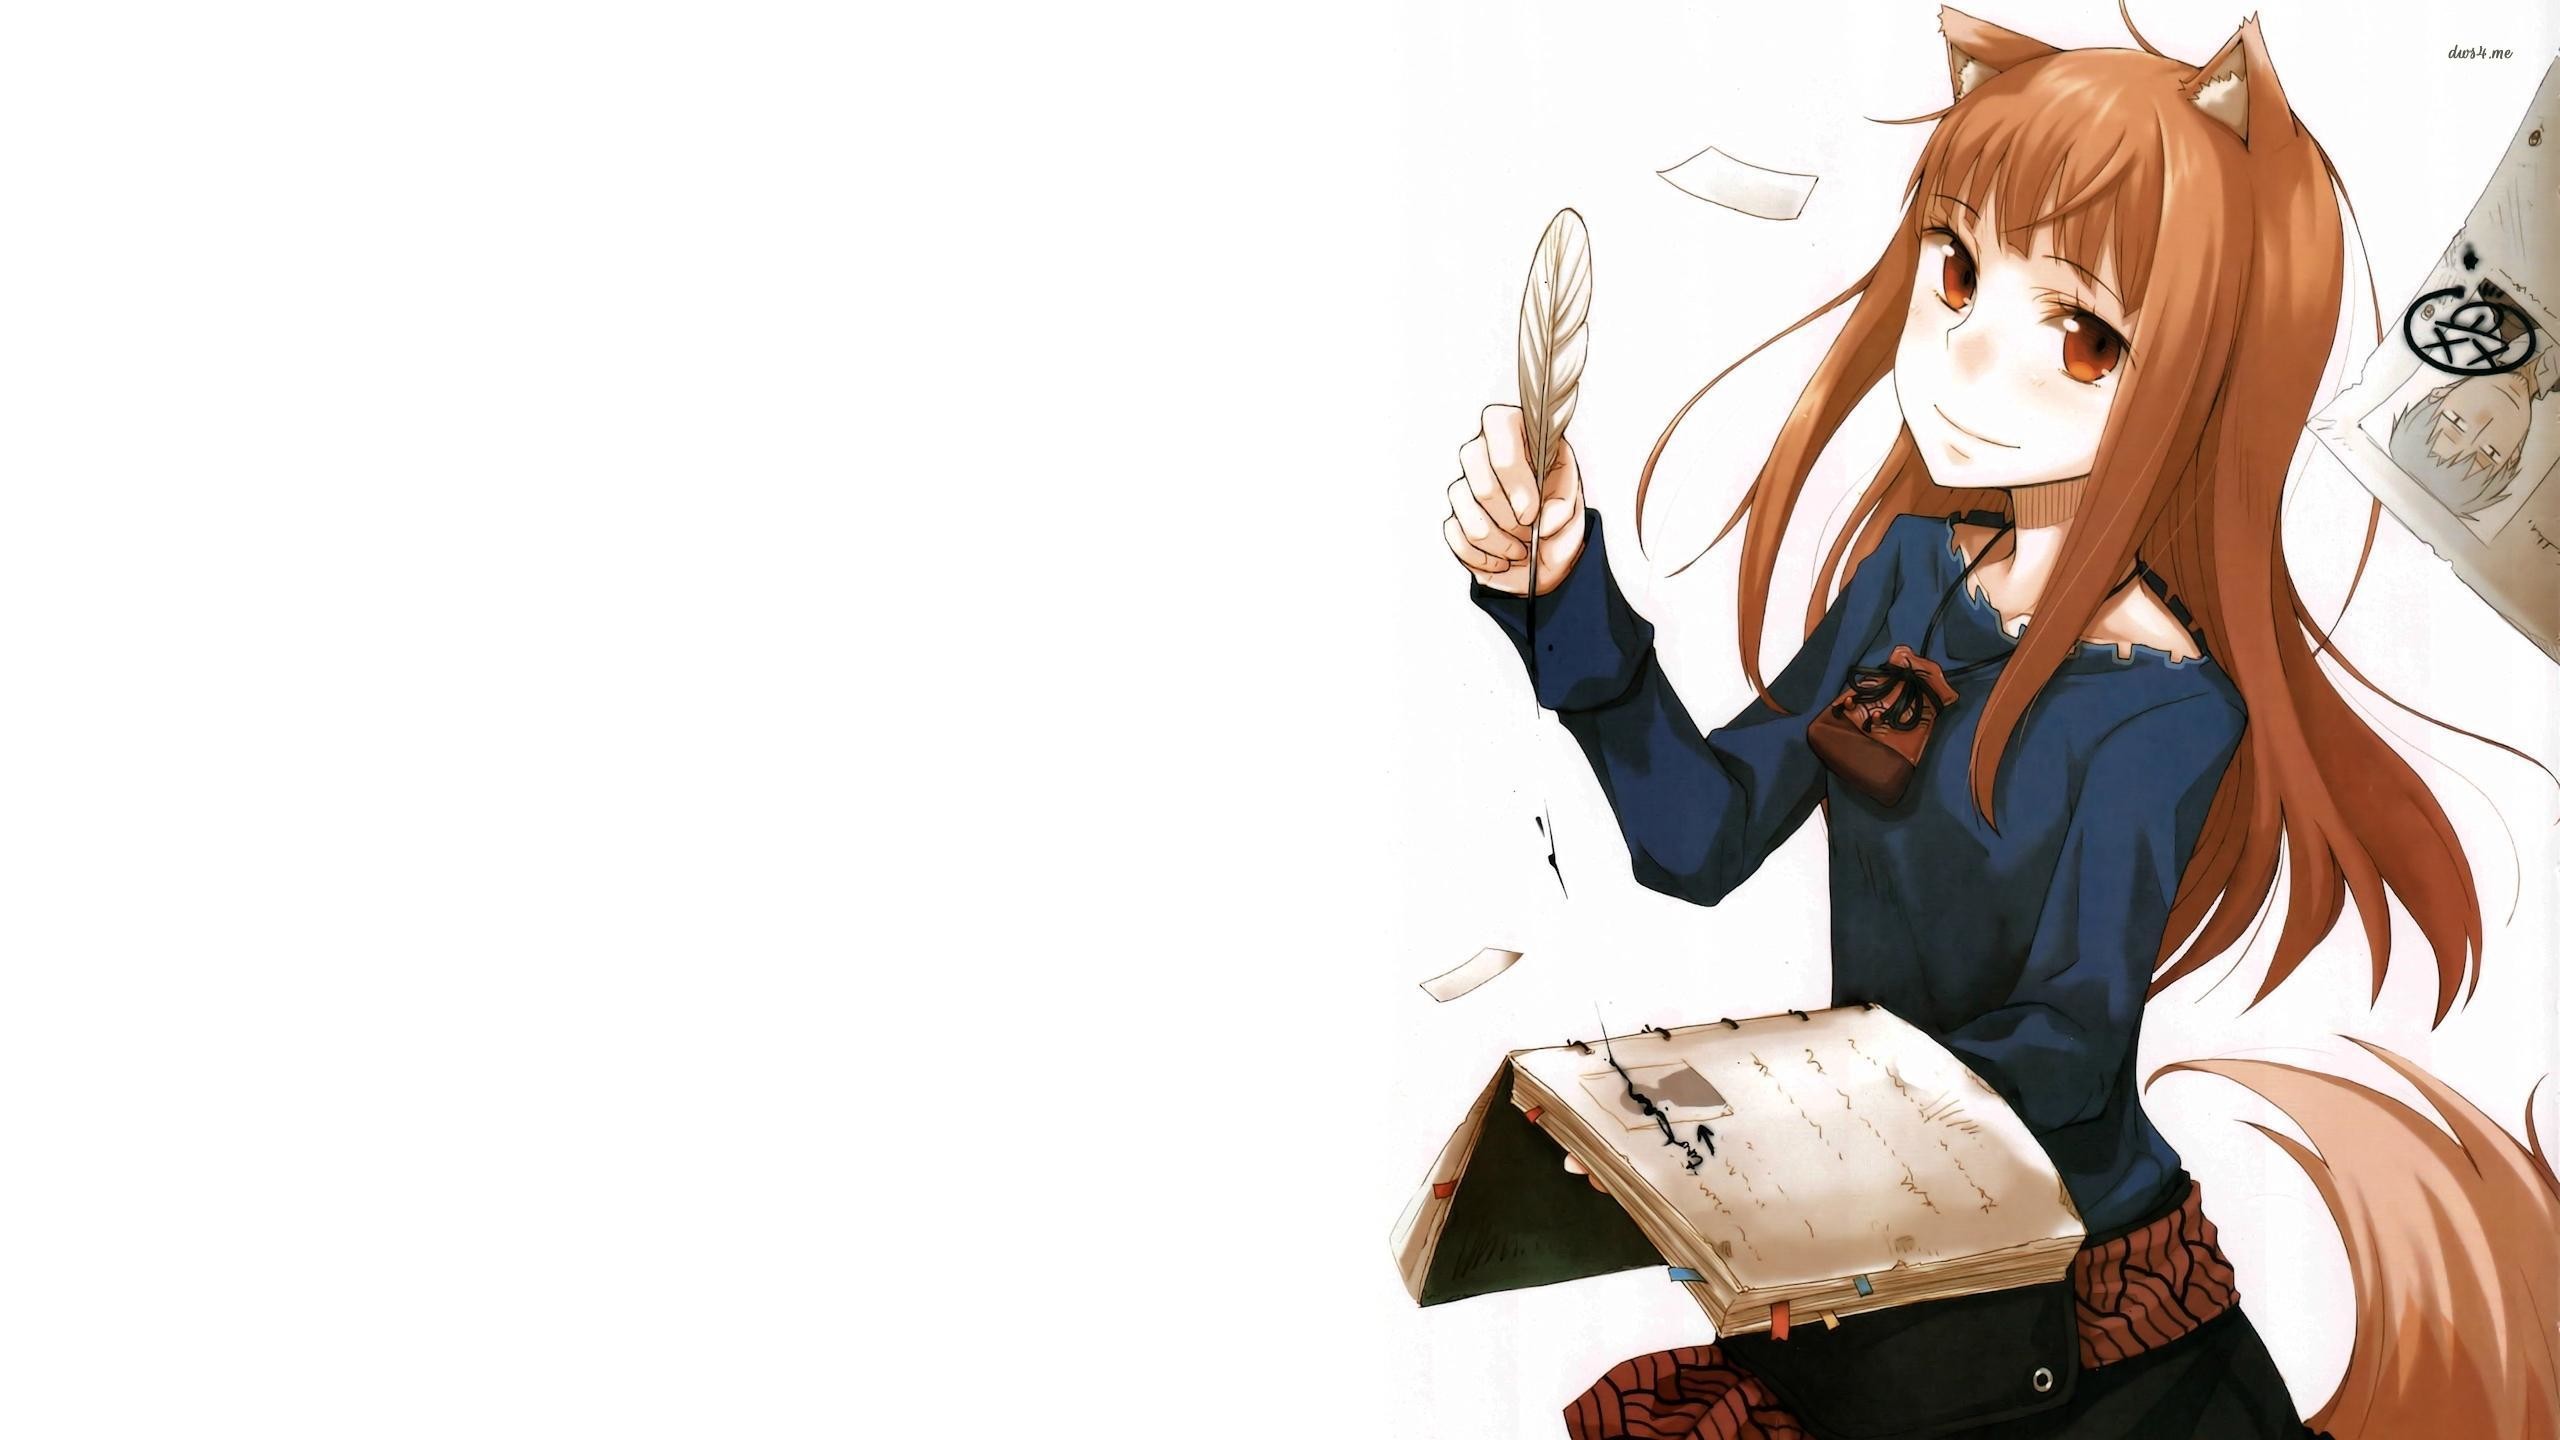 2560x1440 ... Holo writing in the diary - Spice and Wolf wallpaper  ...